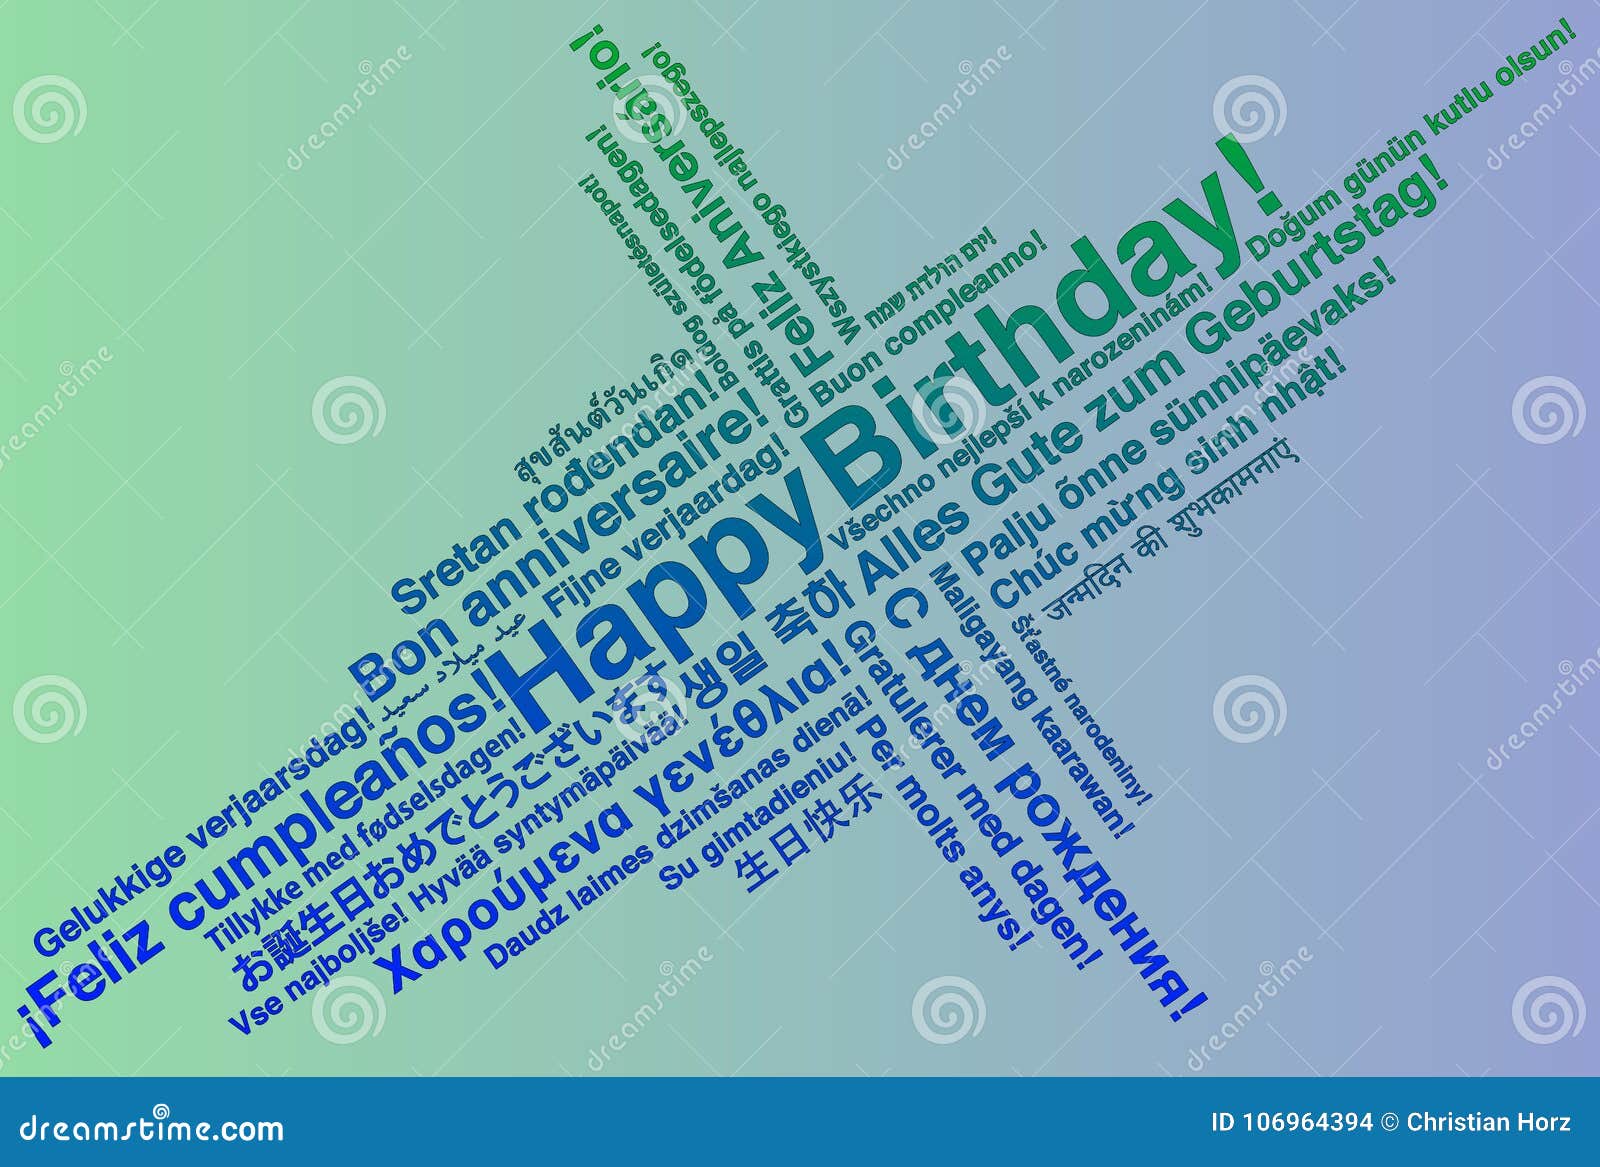 Happy Birthday In Different Languages Greeting Card Stock Illustration Illustration Of Greek Dutch